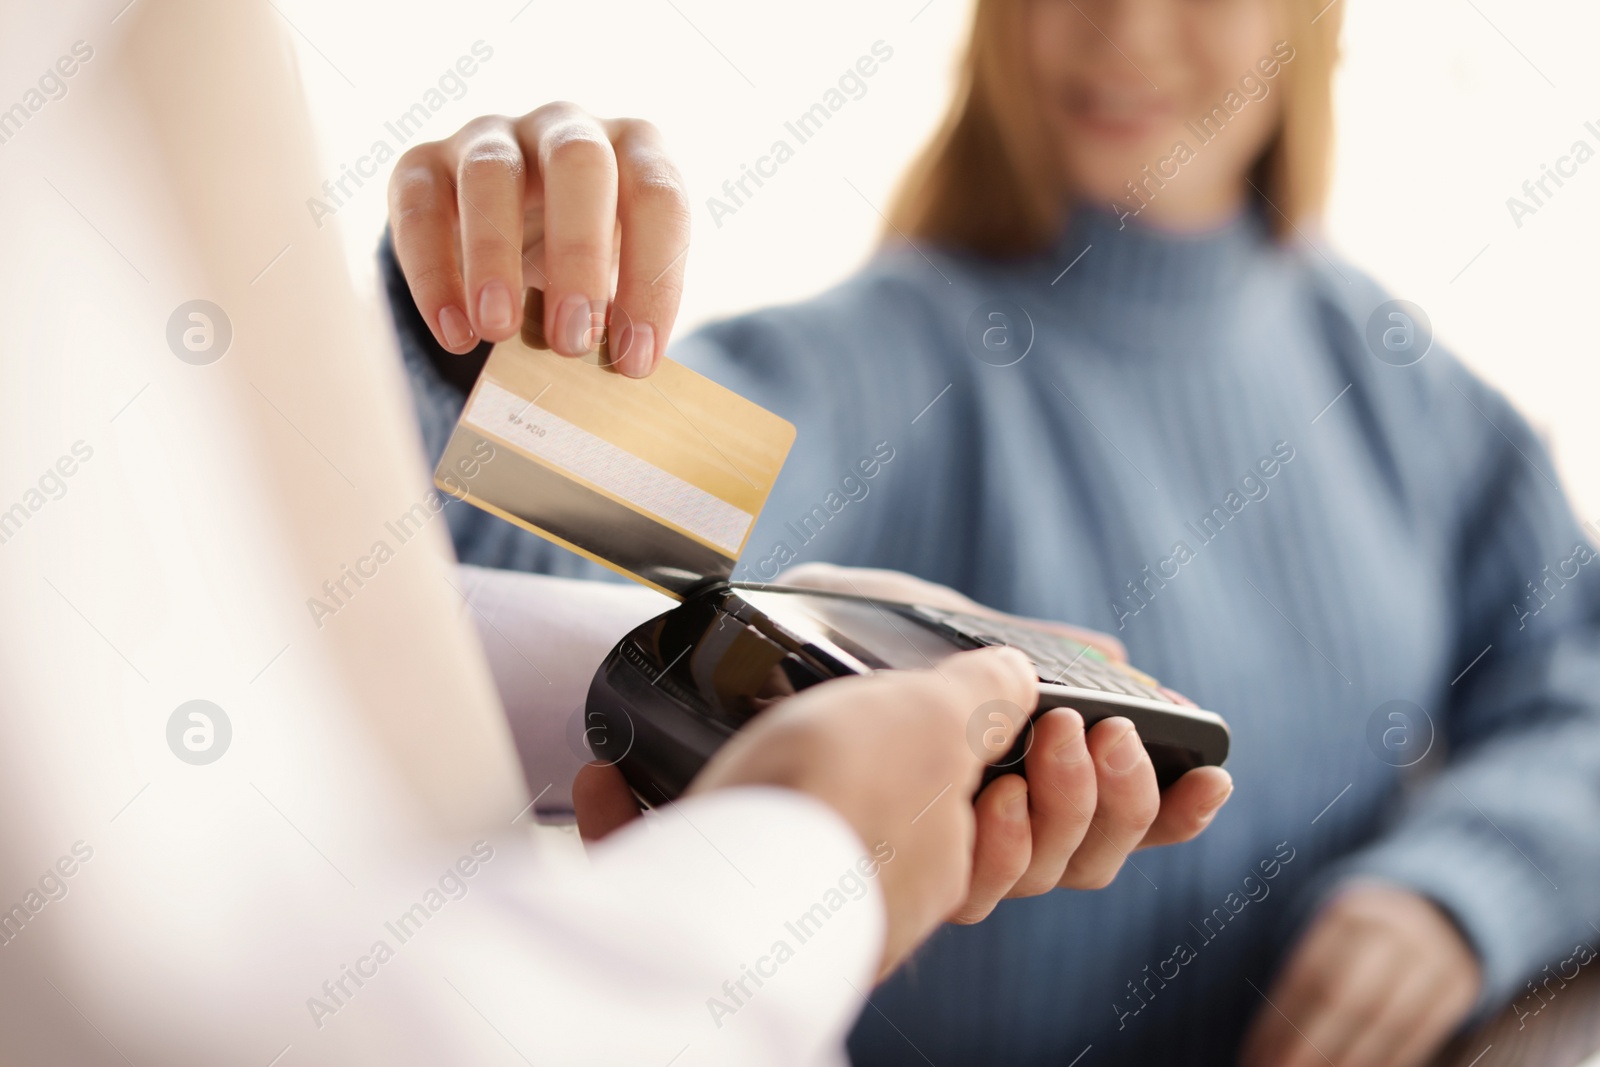 Photo of Woman with credit card using payment terminal at restaurant, closeup